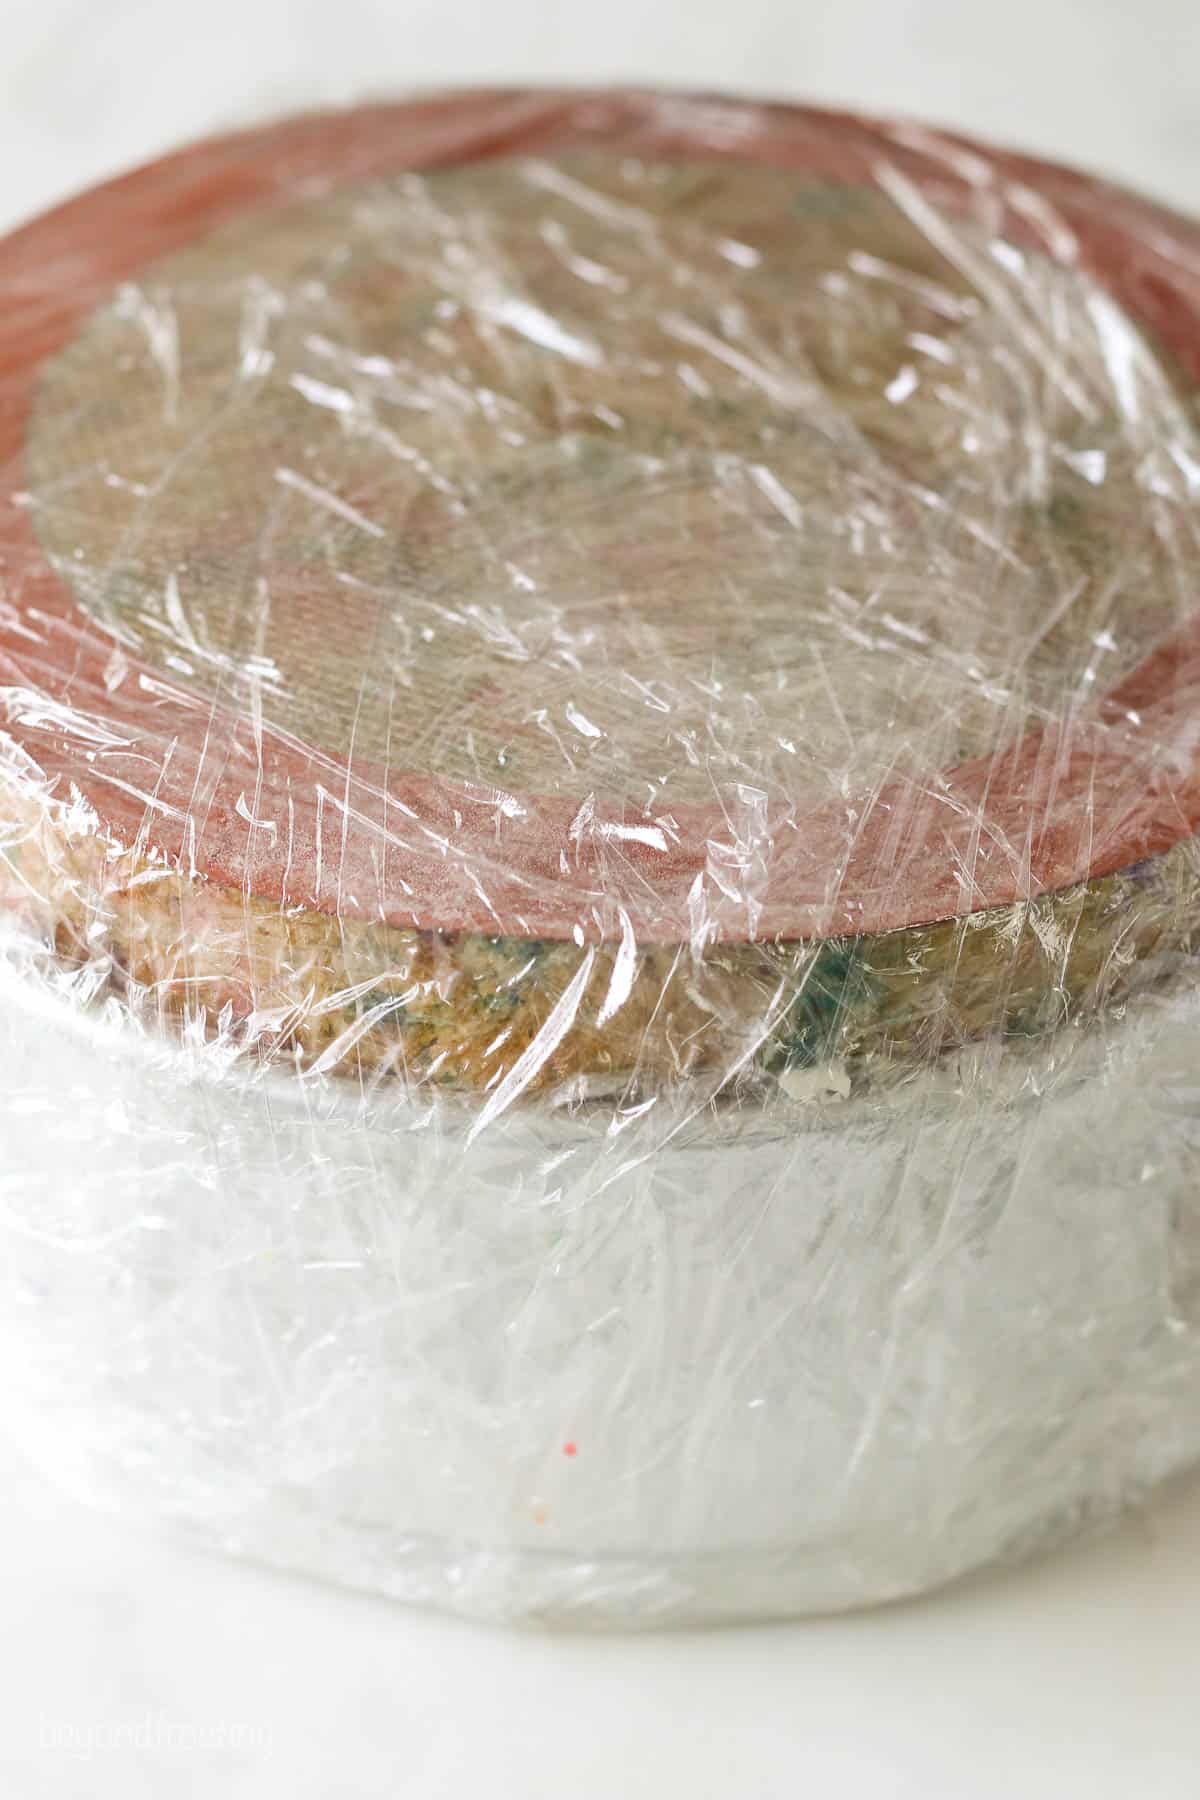 A cake pan wrapped in plastic